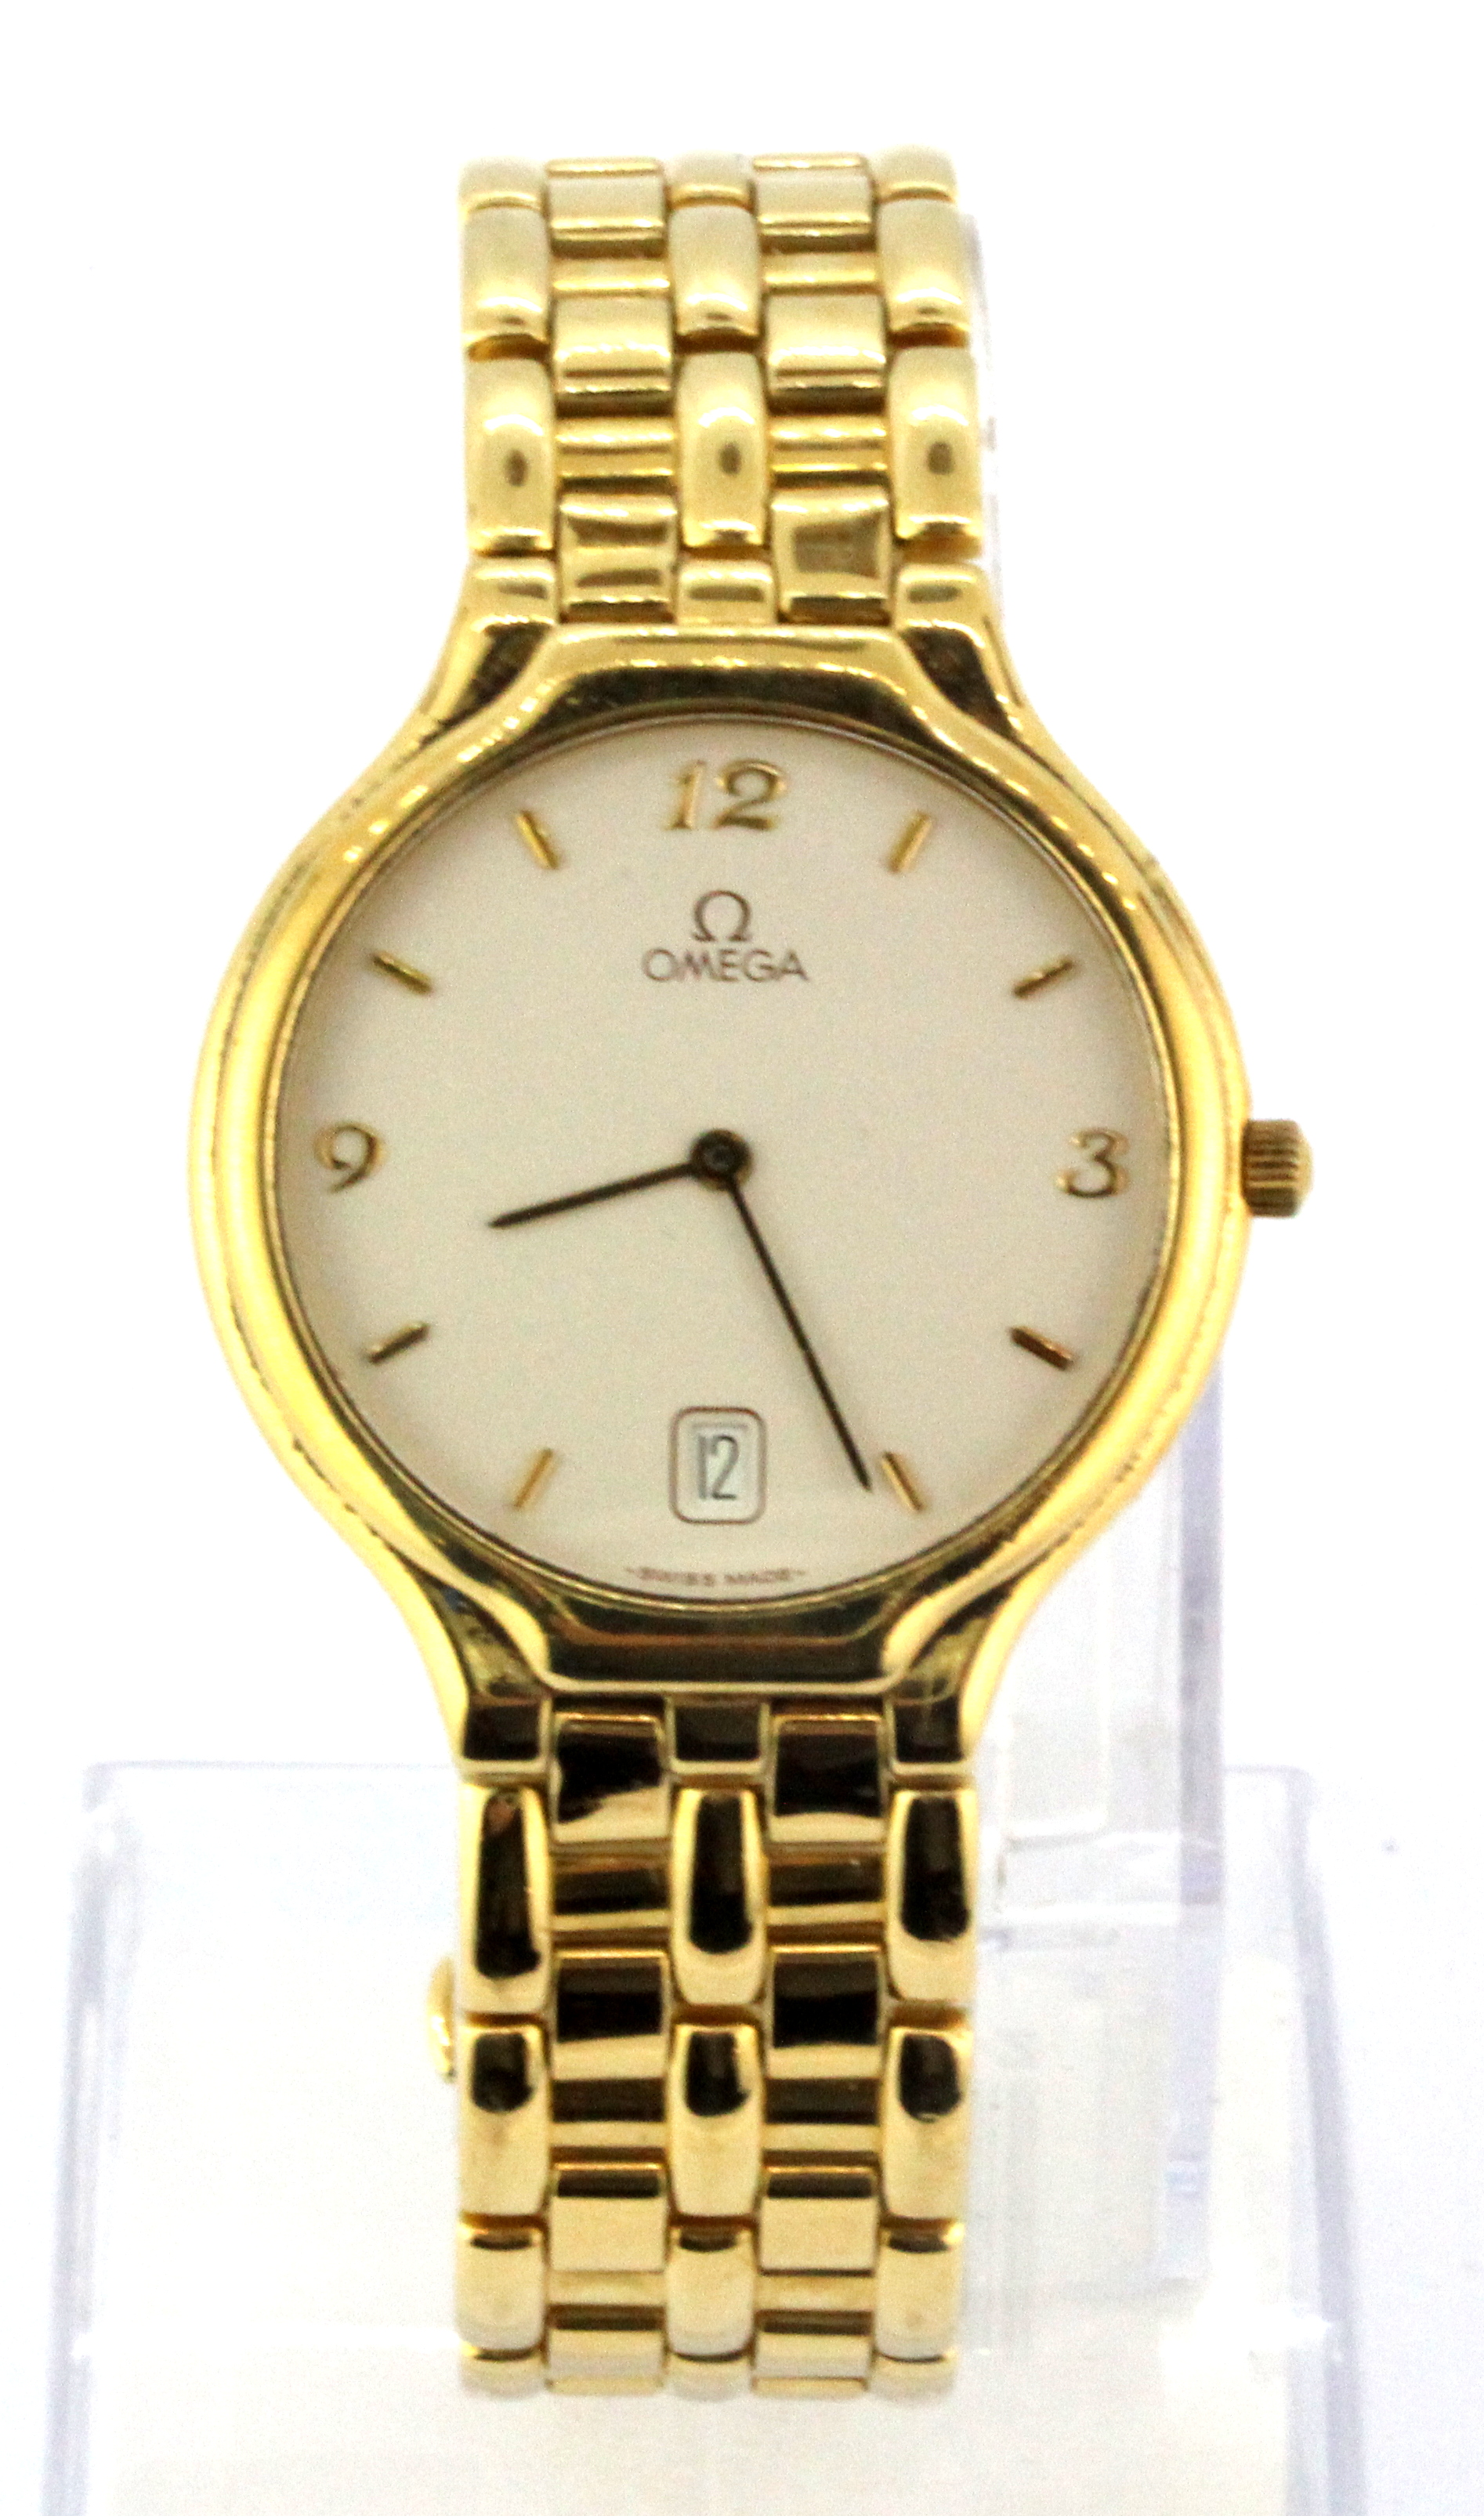 A gentleman's Omega 18ct yellow gold wrist watch. Understood to be in good working condition.